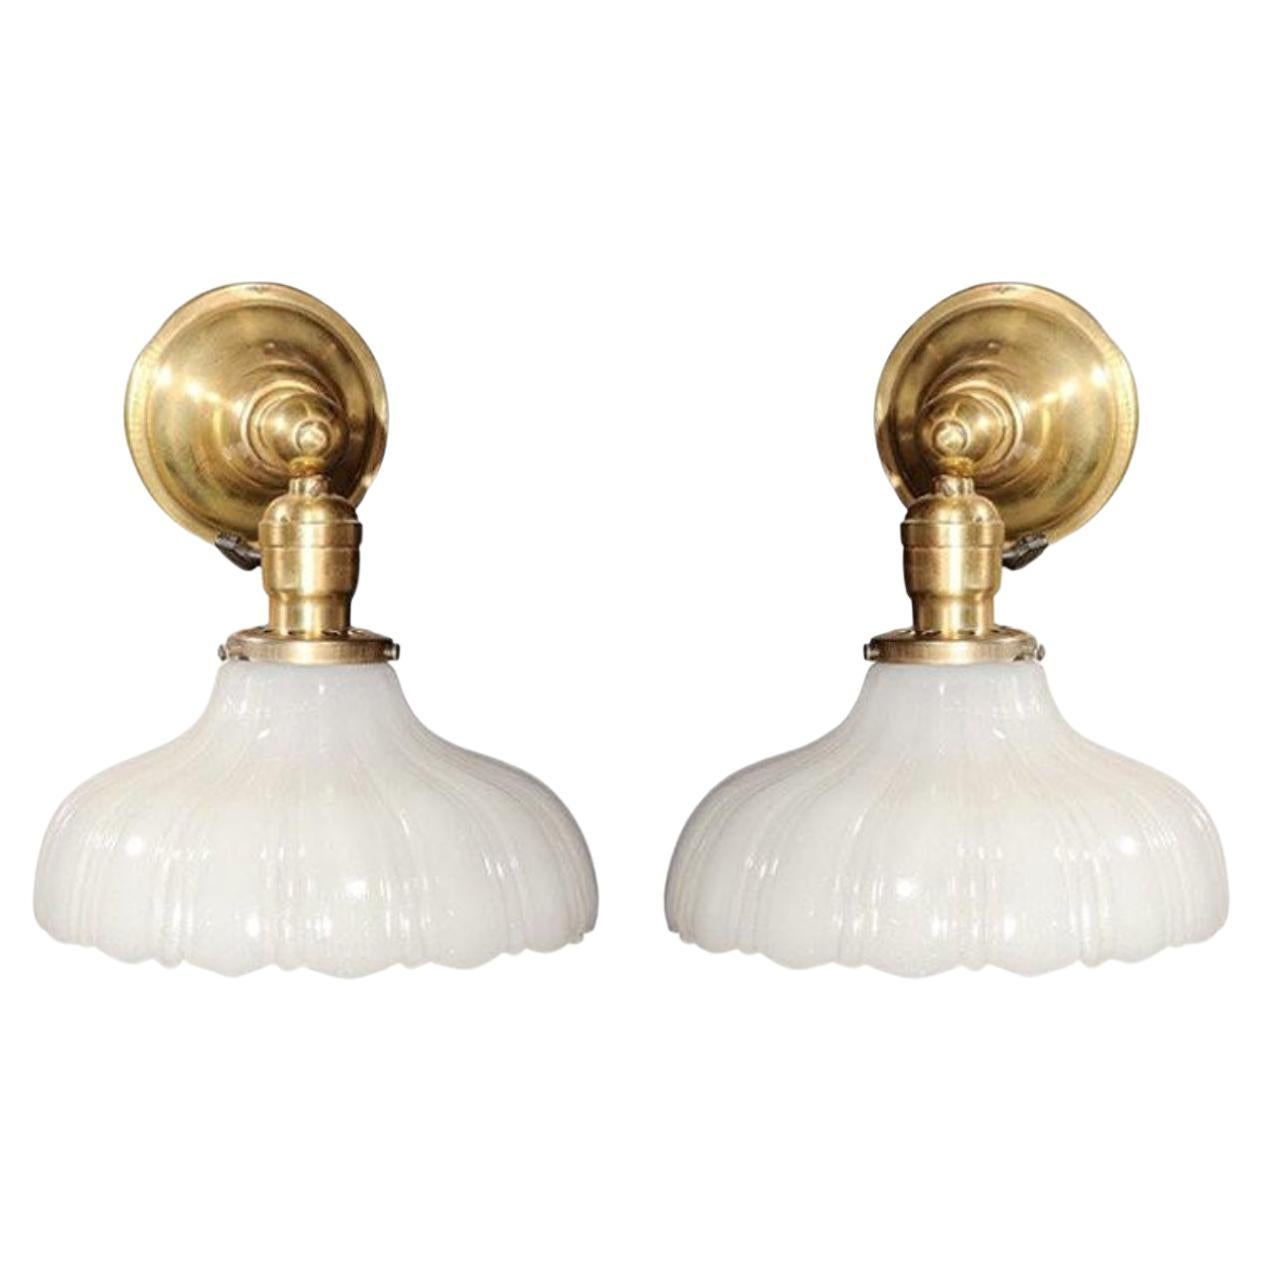 Pair of Vintage Scalloped Milk Glass & Brass Wall Sconces